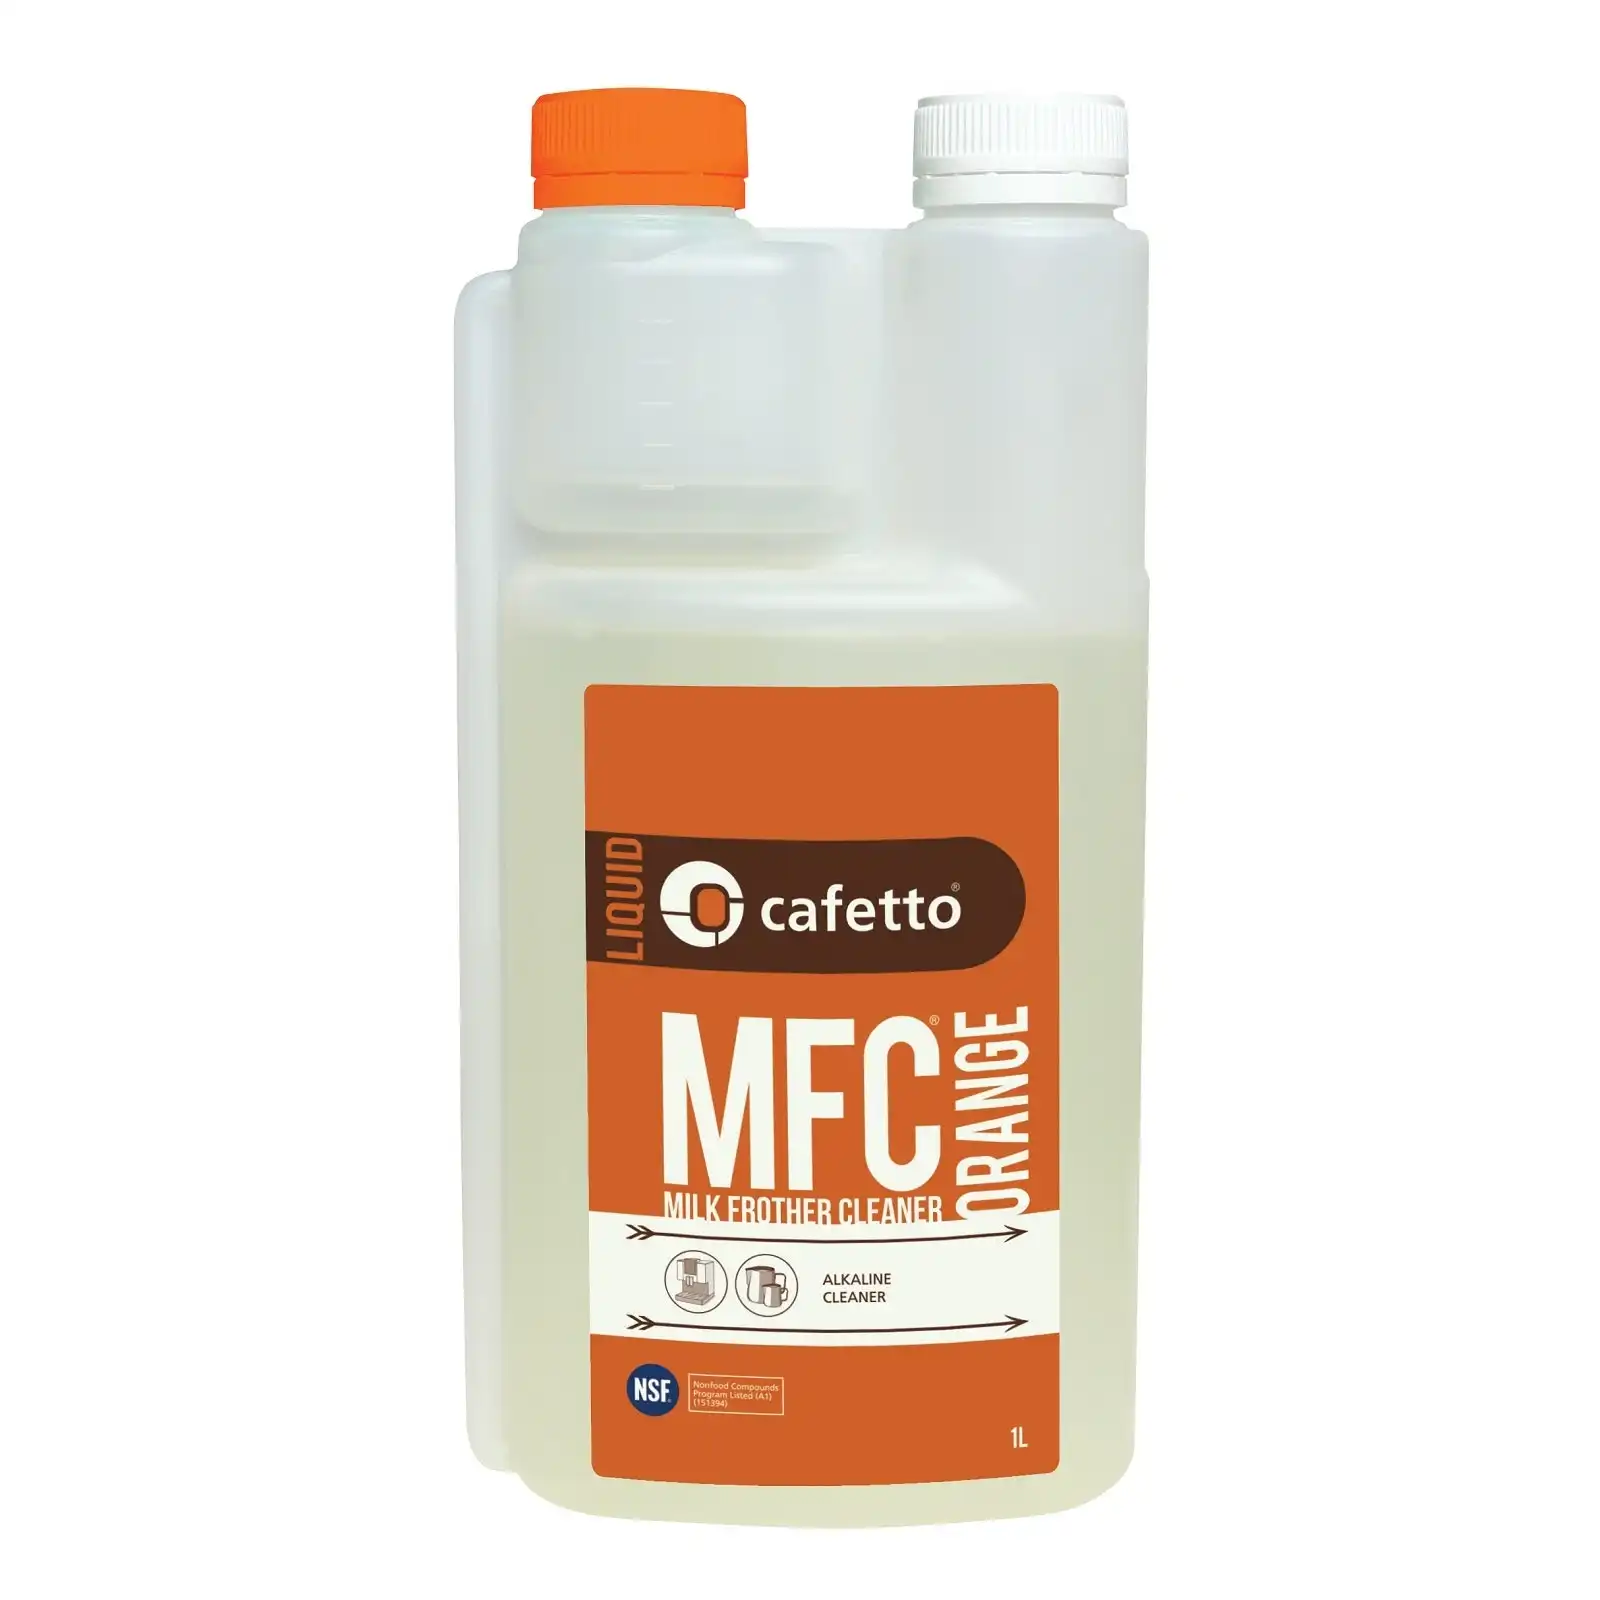 Cafetto MFC ORGANIC MILK FROTHER CLEANER - ORANGE - 1 Litre